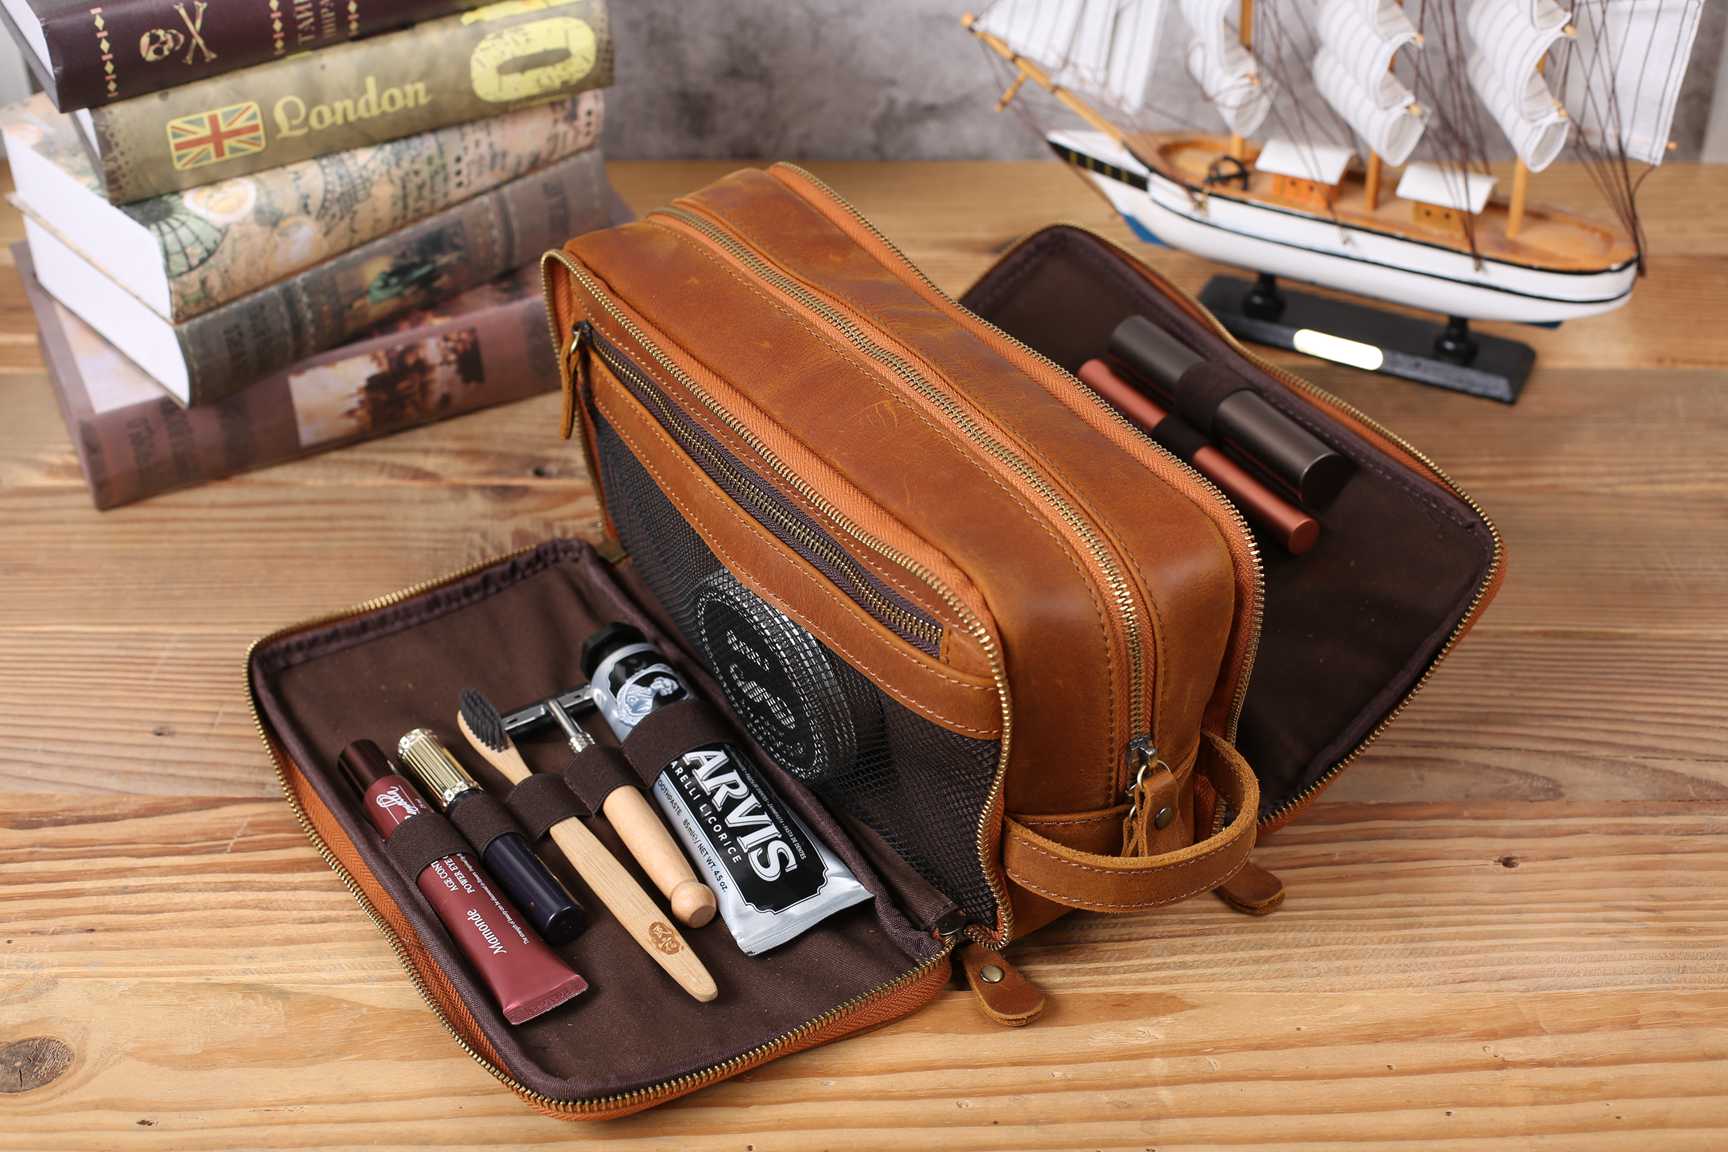  10 Premium Leather Toiletry Travel Pouch With